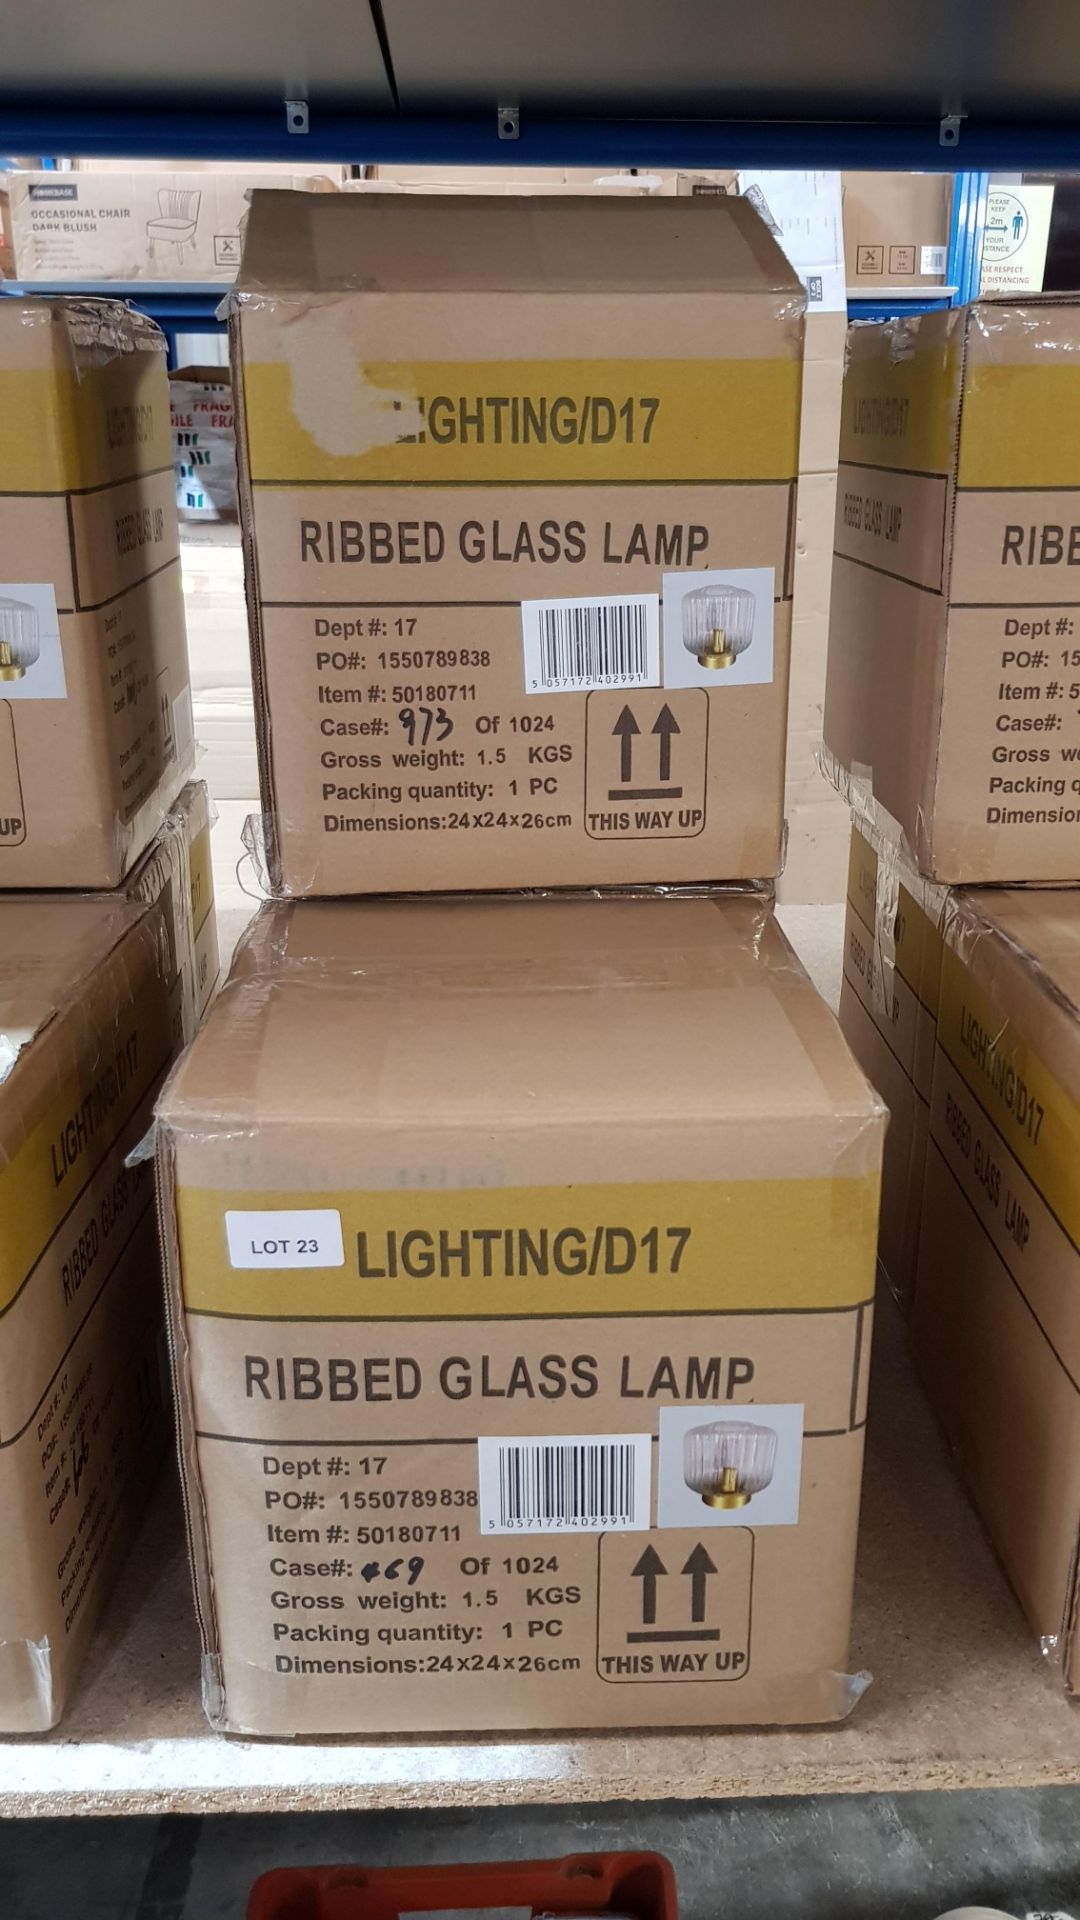 (R6A) Lighting. 3 X Ribbed Glass Lamp. (May Contain Undelivered / Wrong Item Return Sticker) - Image 2 of 2